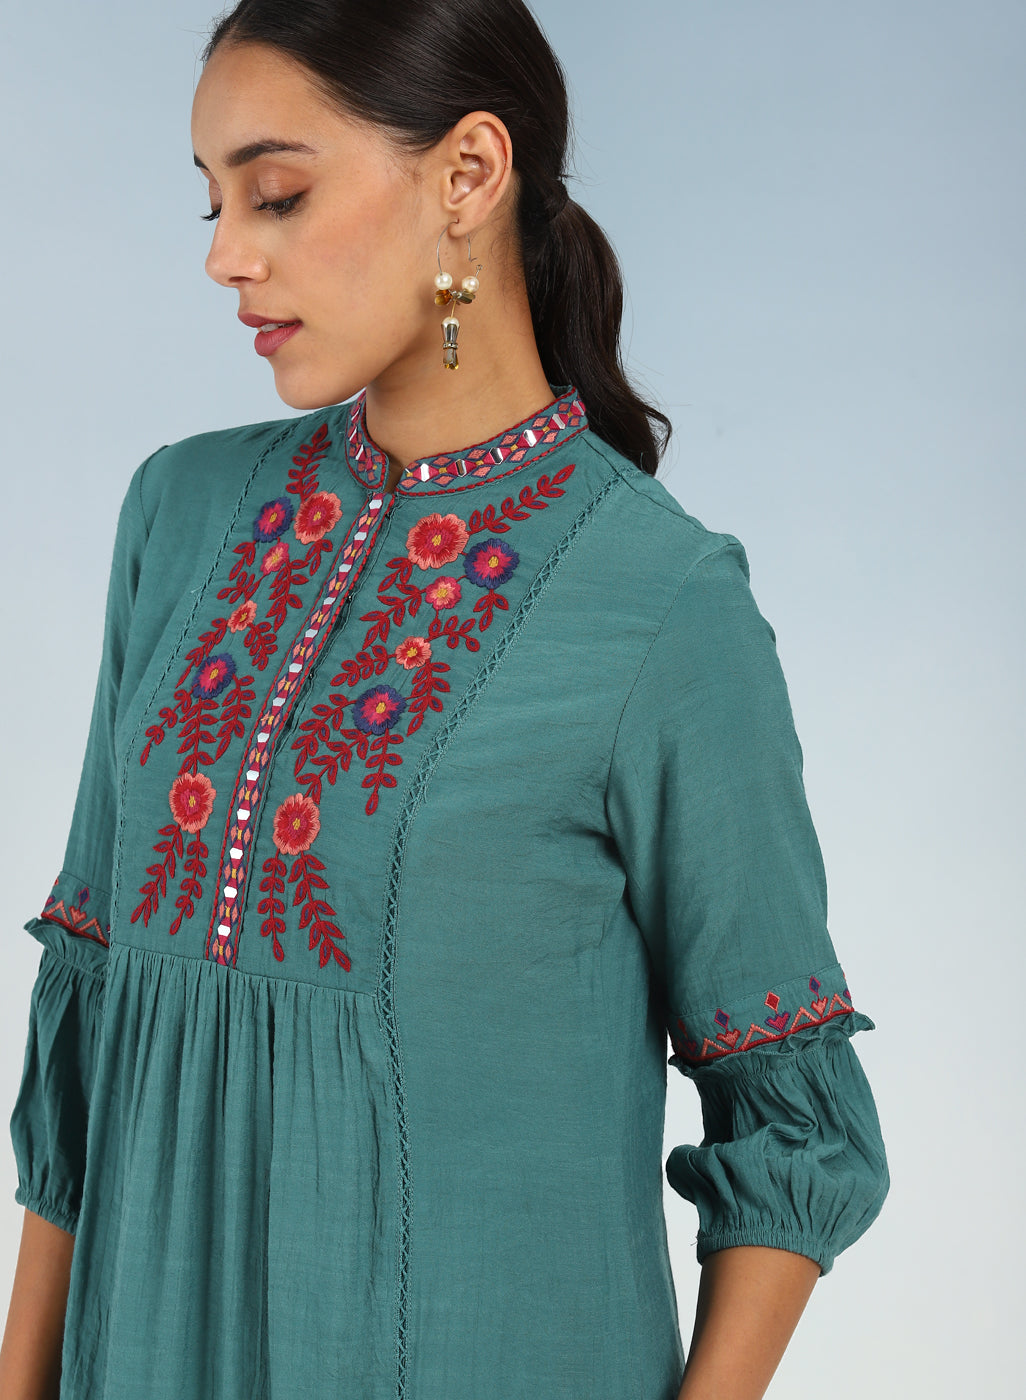 Solid Teal Tunic with Stylish Gathered Sleeve